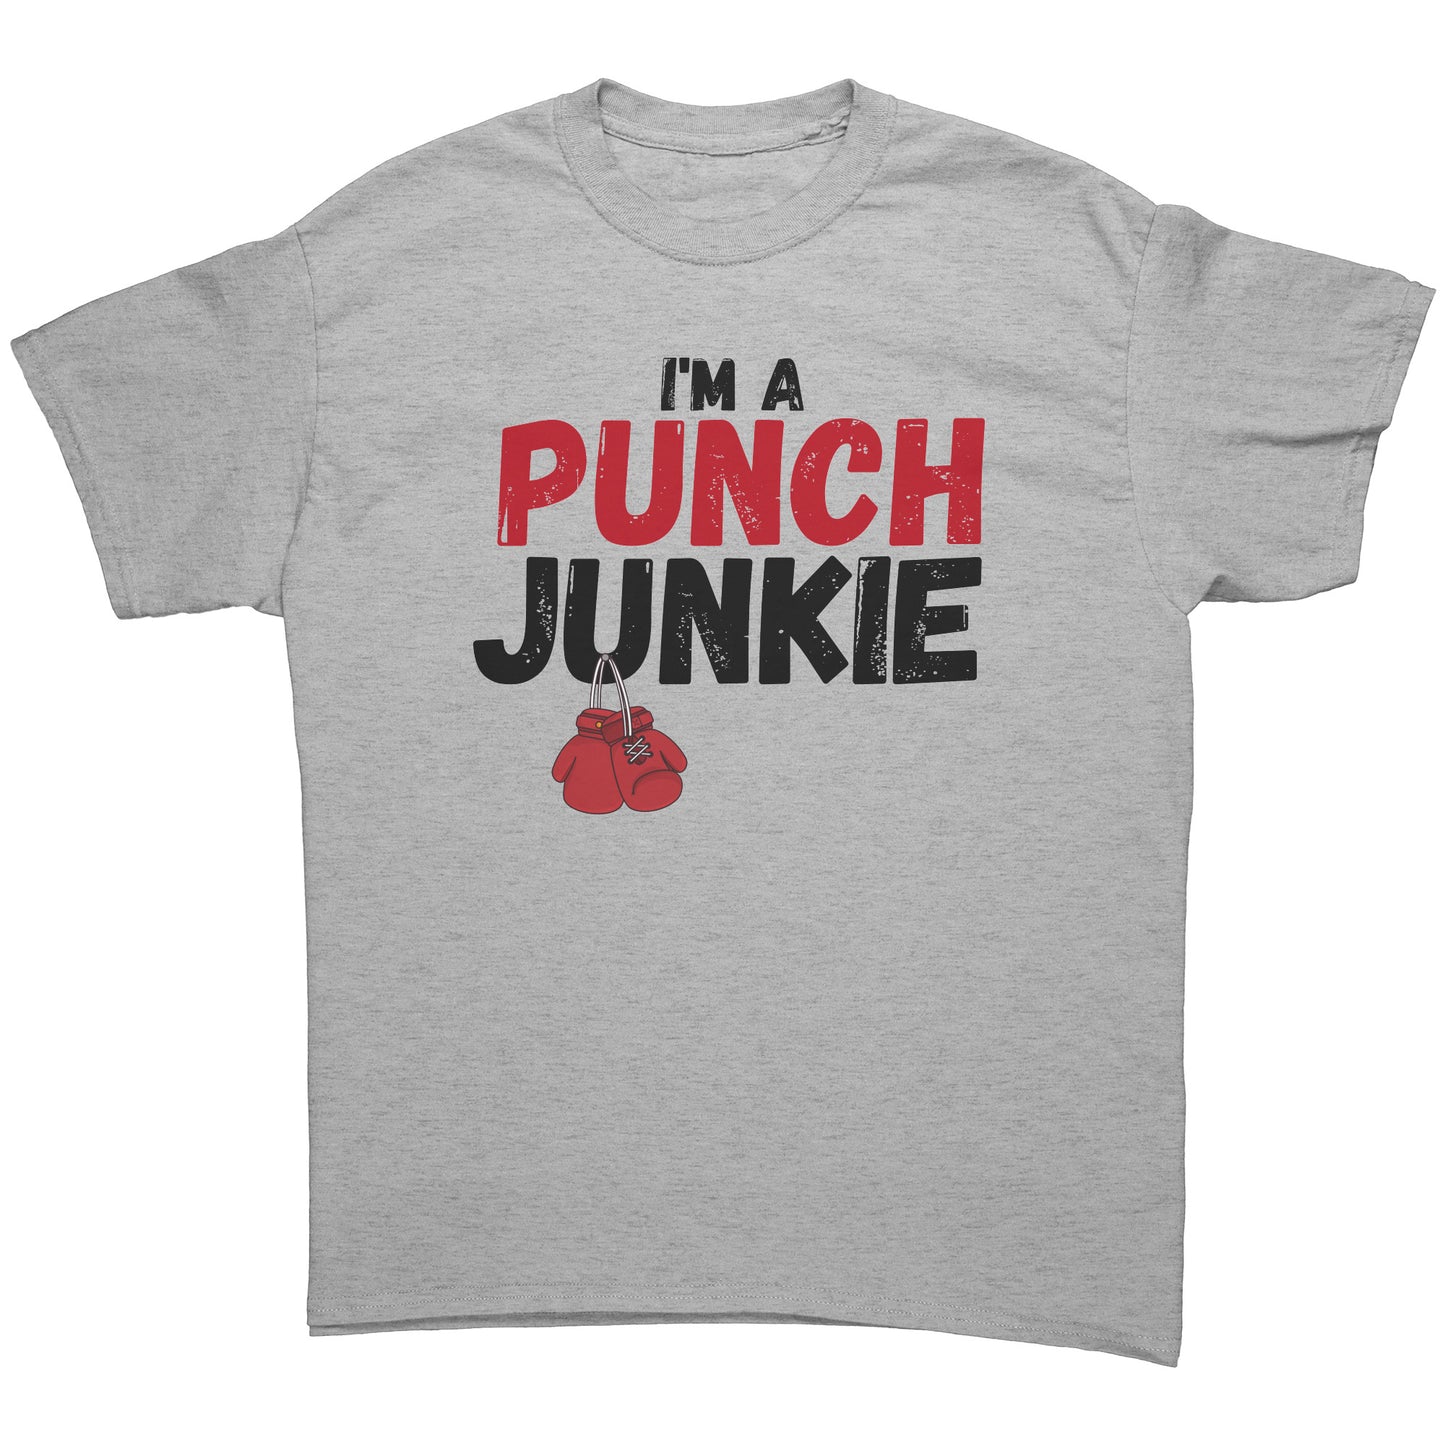 The "I'm a Punch Junkie" Official T-Shirt